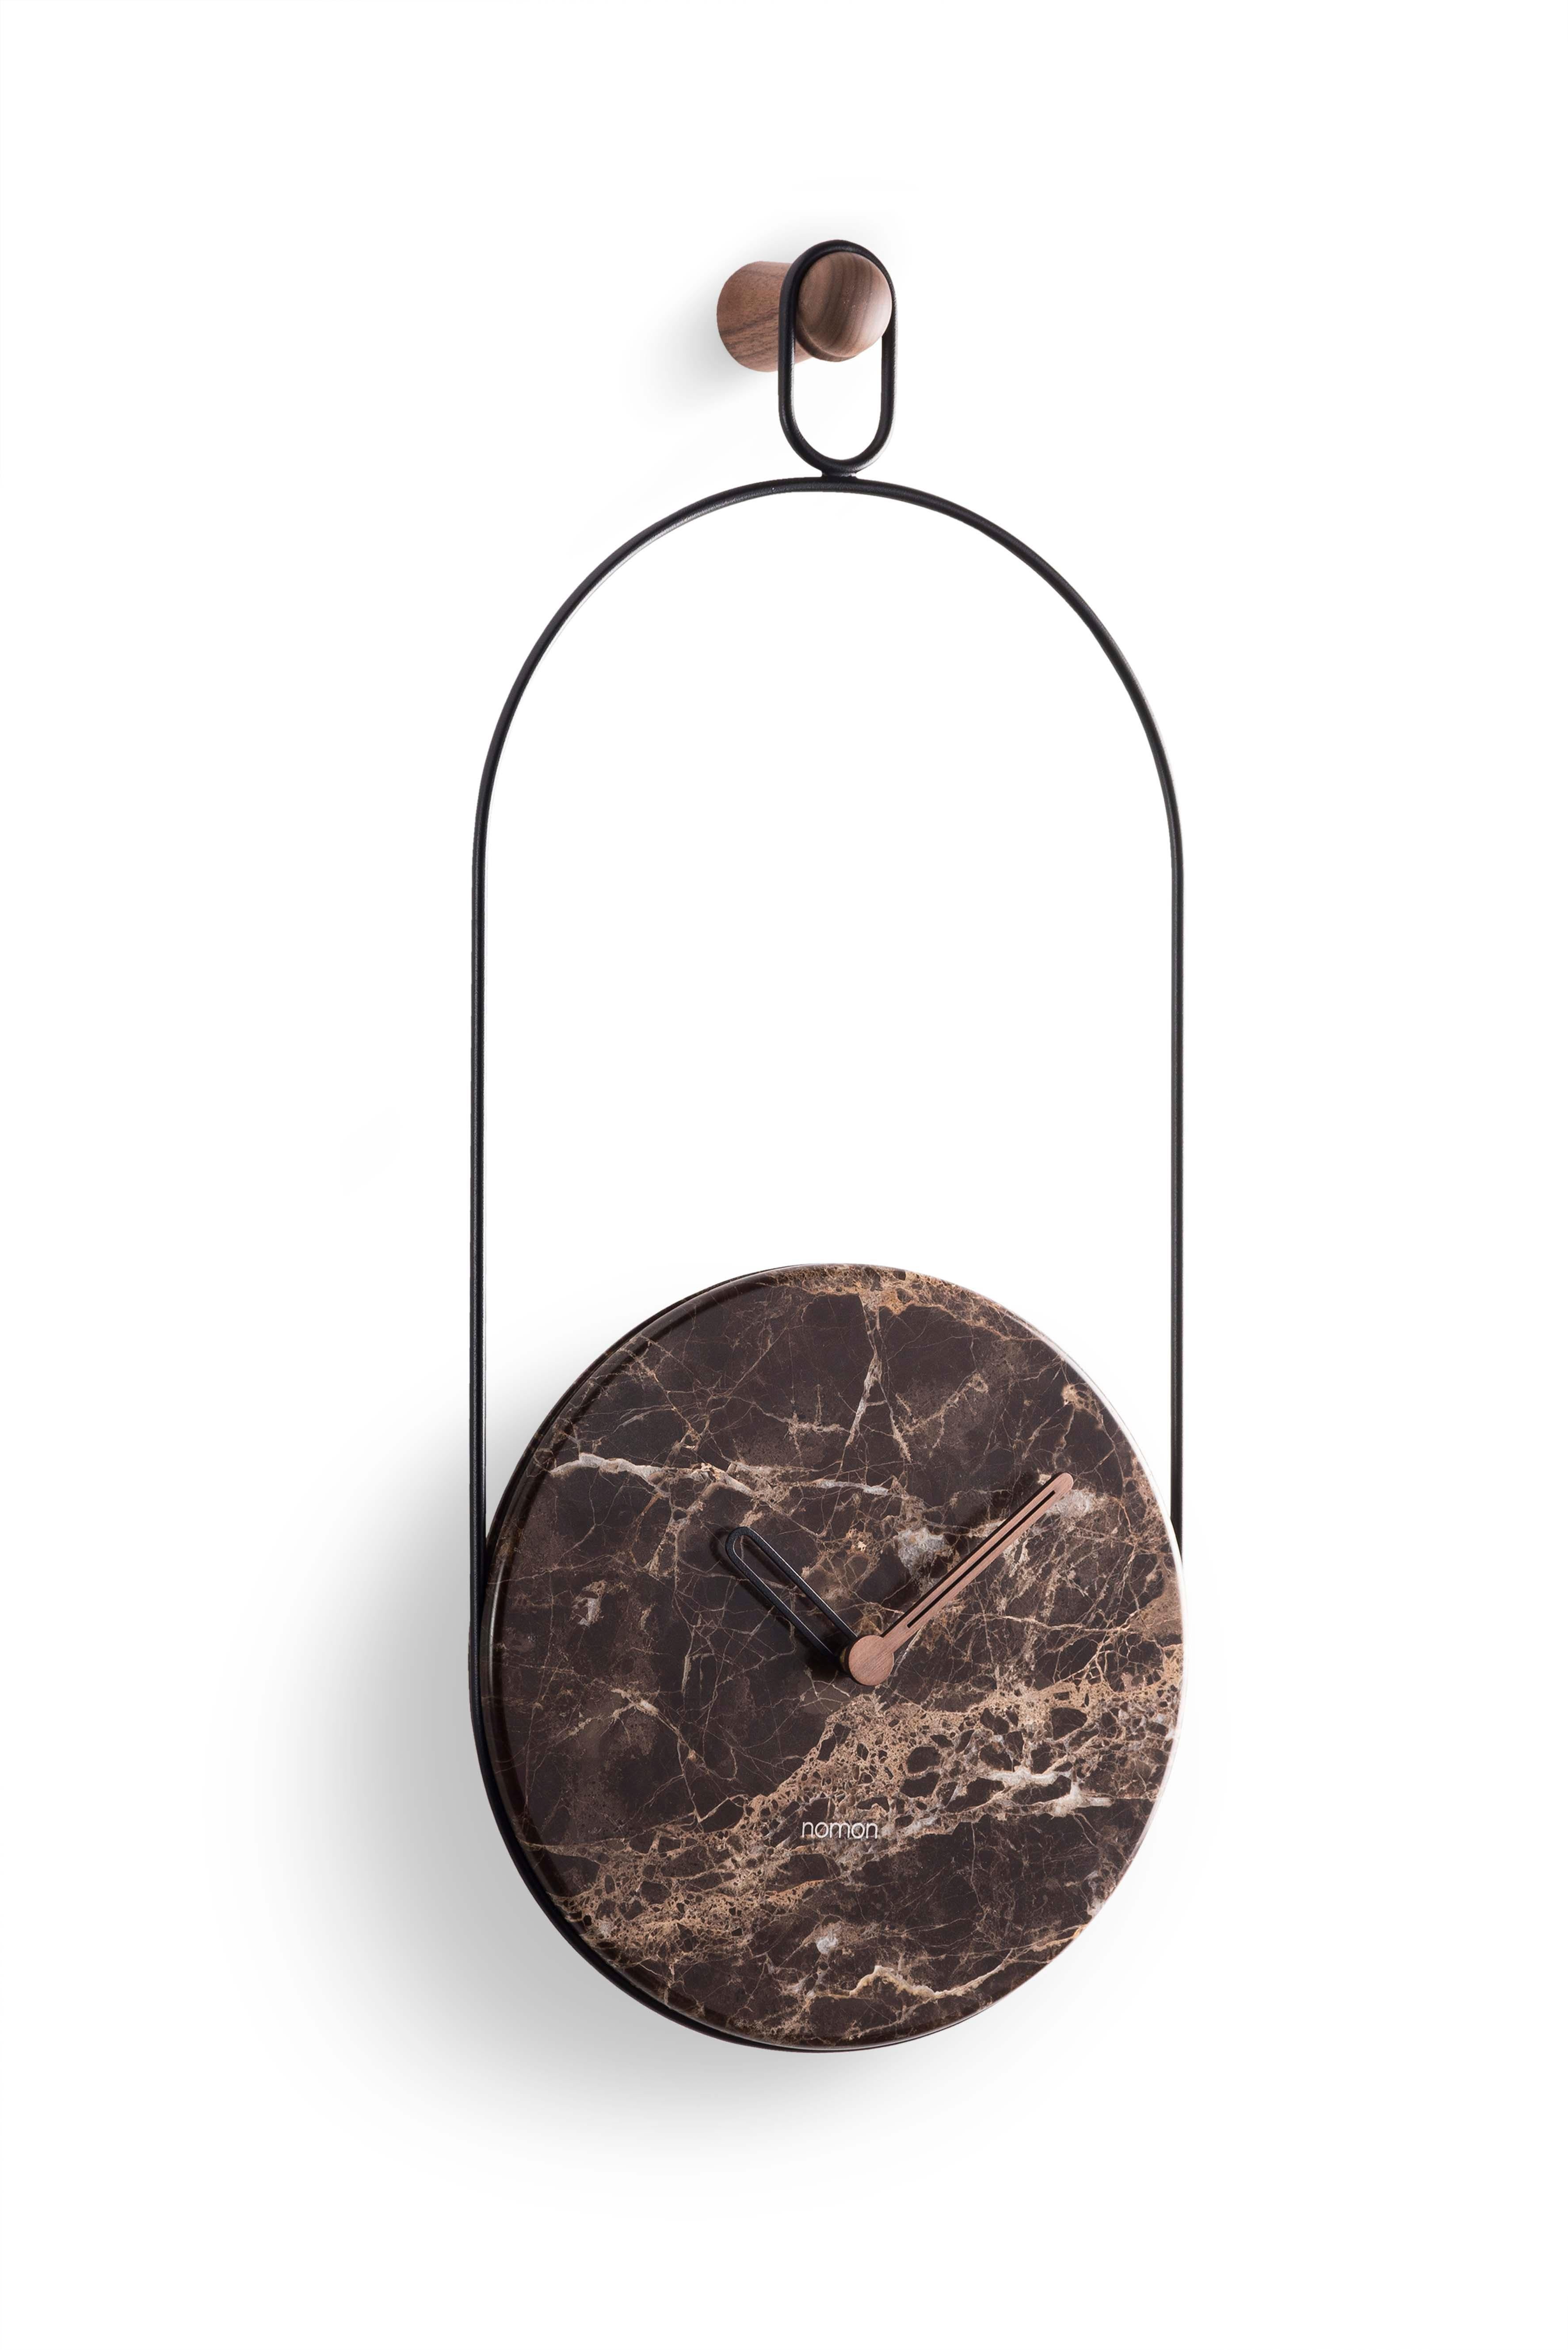 Brass Nomon Eslabon Wall Clock  By Andres Martinez For Sale